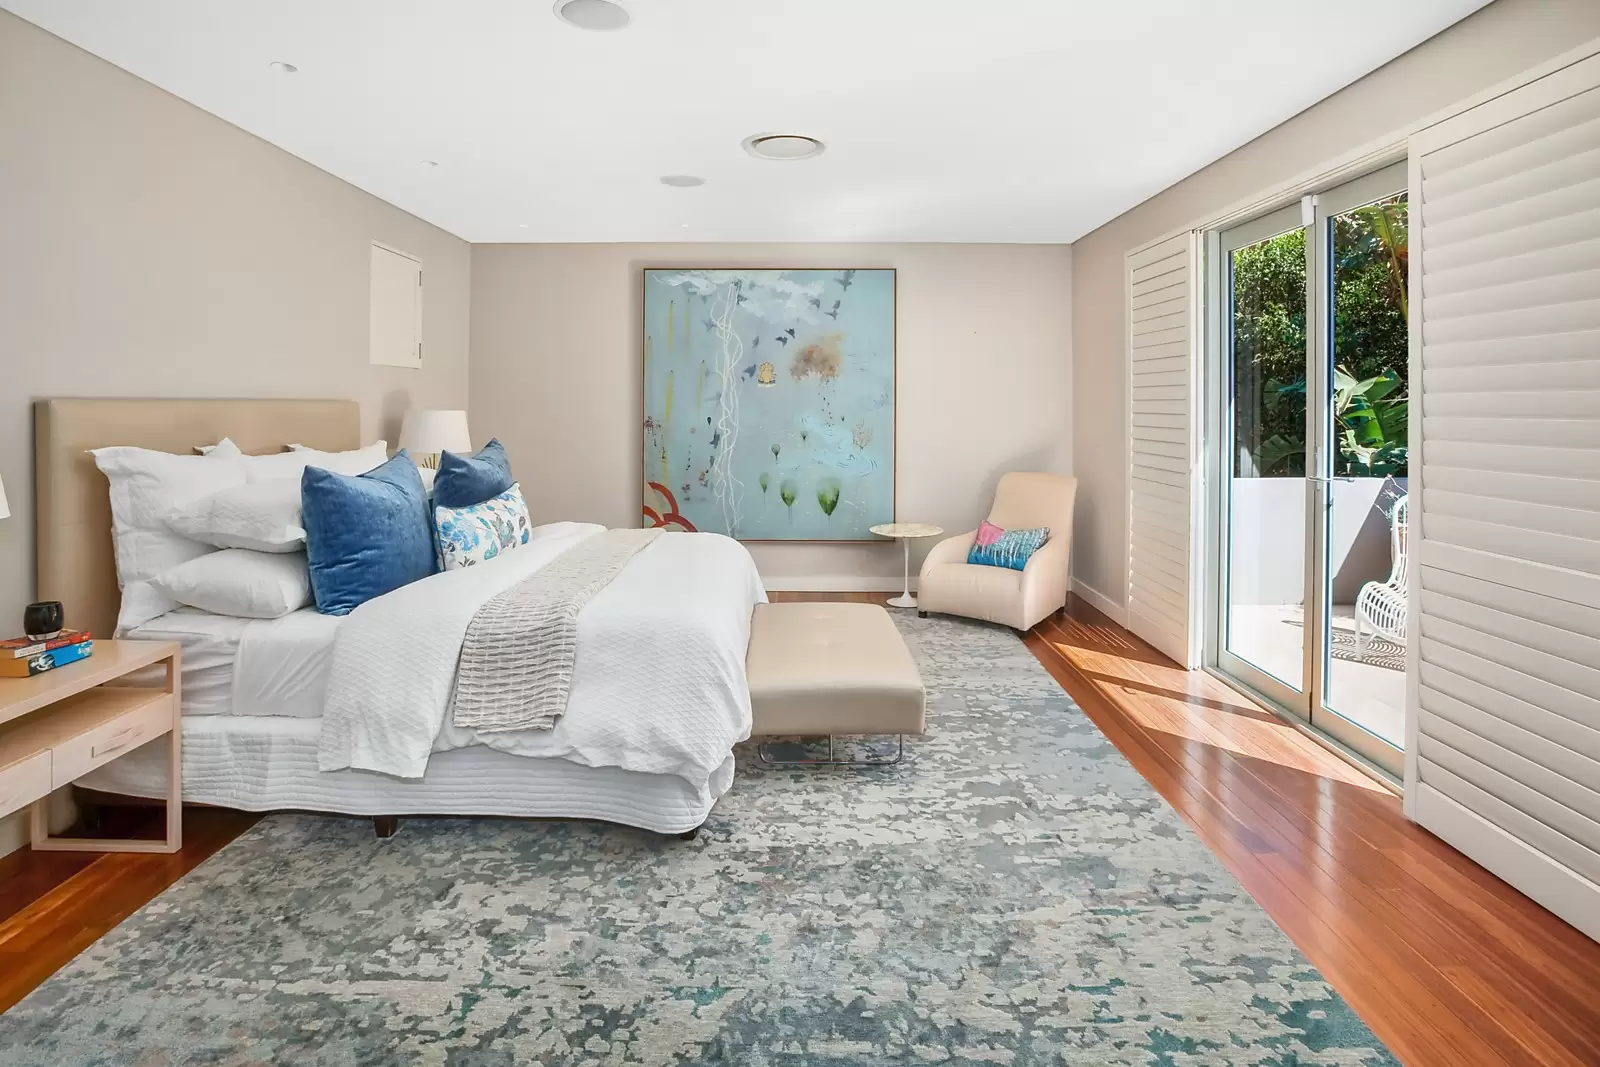 Photo #8: 48 - 50 Balfour Road, Bellevue Hill - Sold by Sydney Sotheby's International Realty